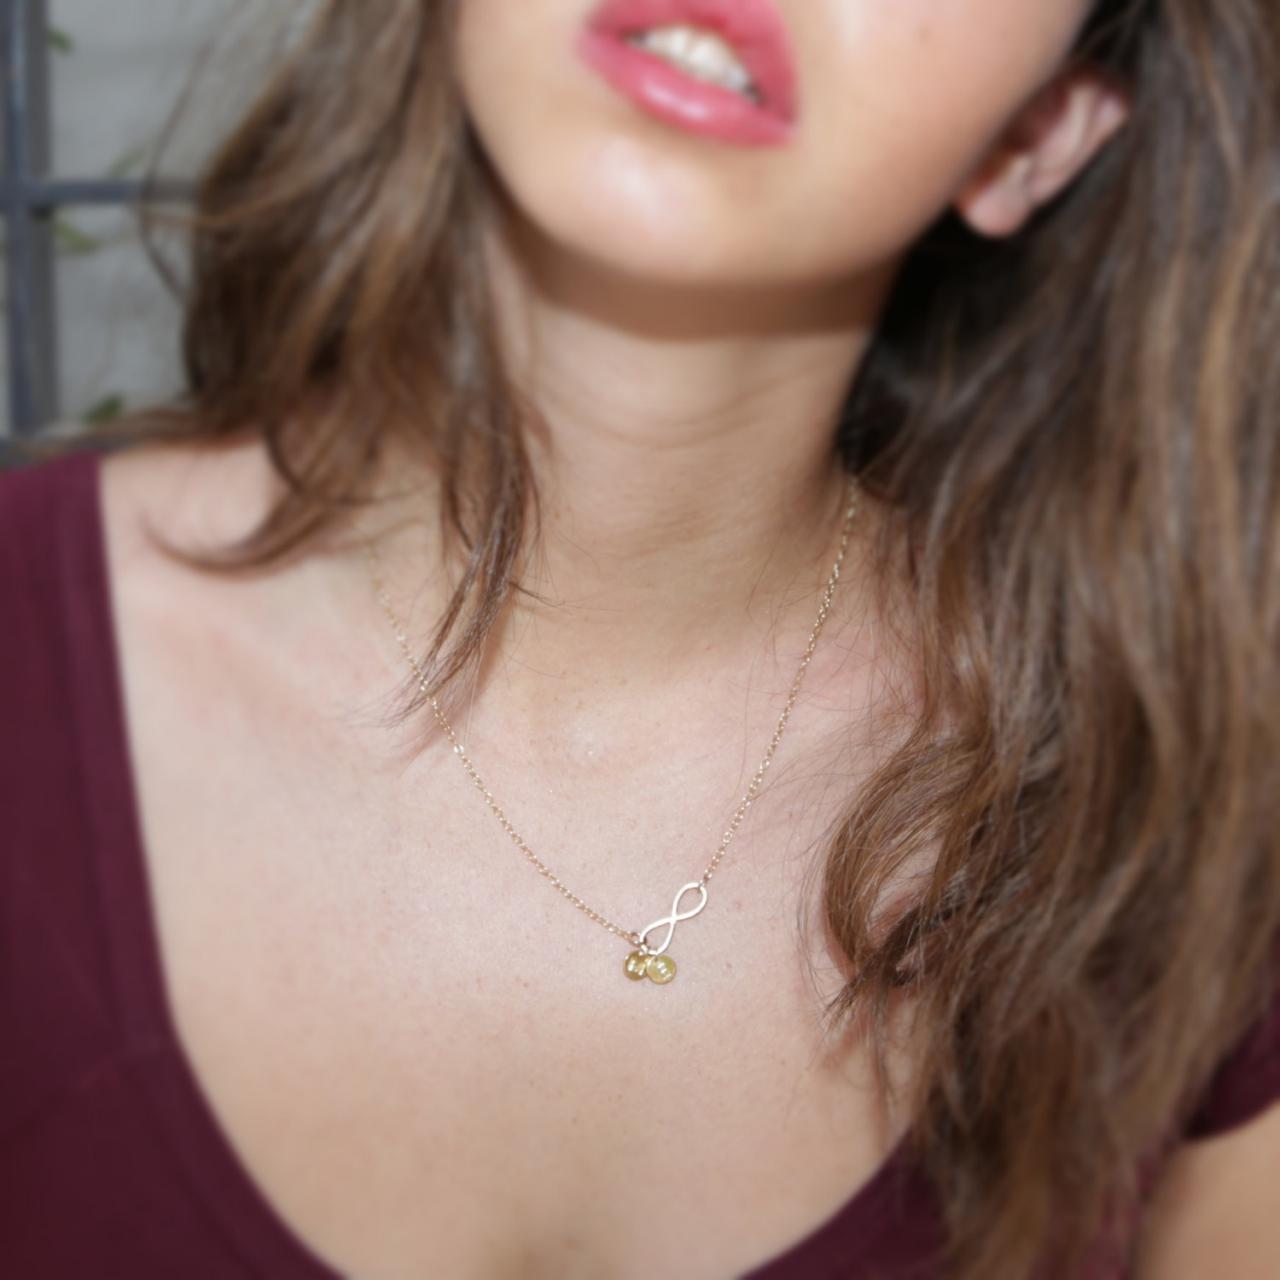 Initial Necklace, Infinity Necklace, Personalized Necklace, Gold Initial Necklace, Initial Infinity 10011